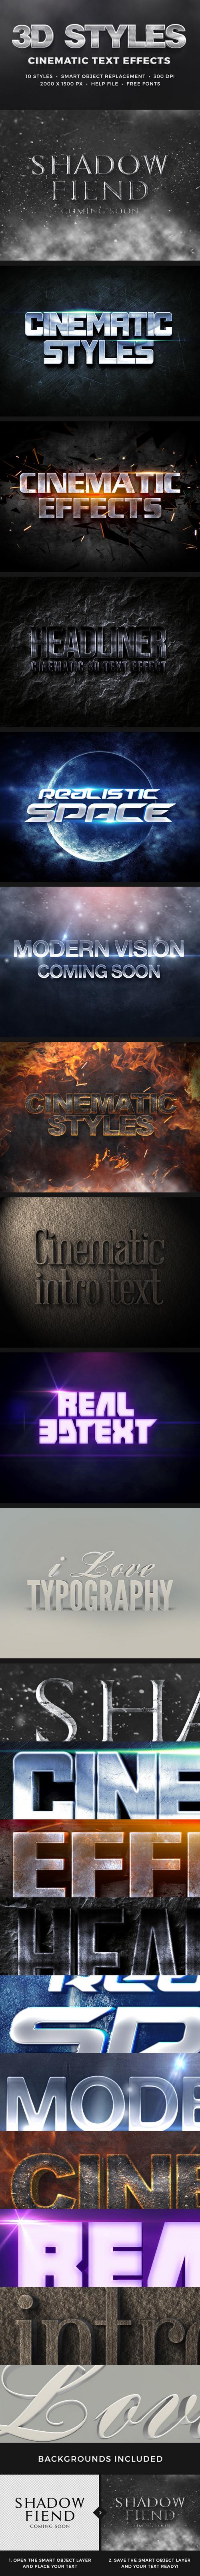 Graphicriver 3D Cinematic Text Effects Vol.1 11031893